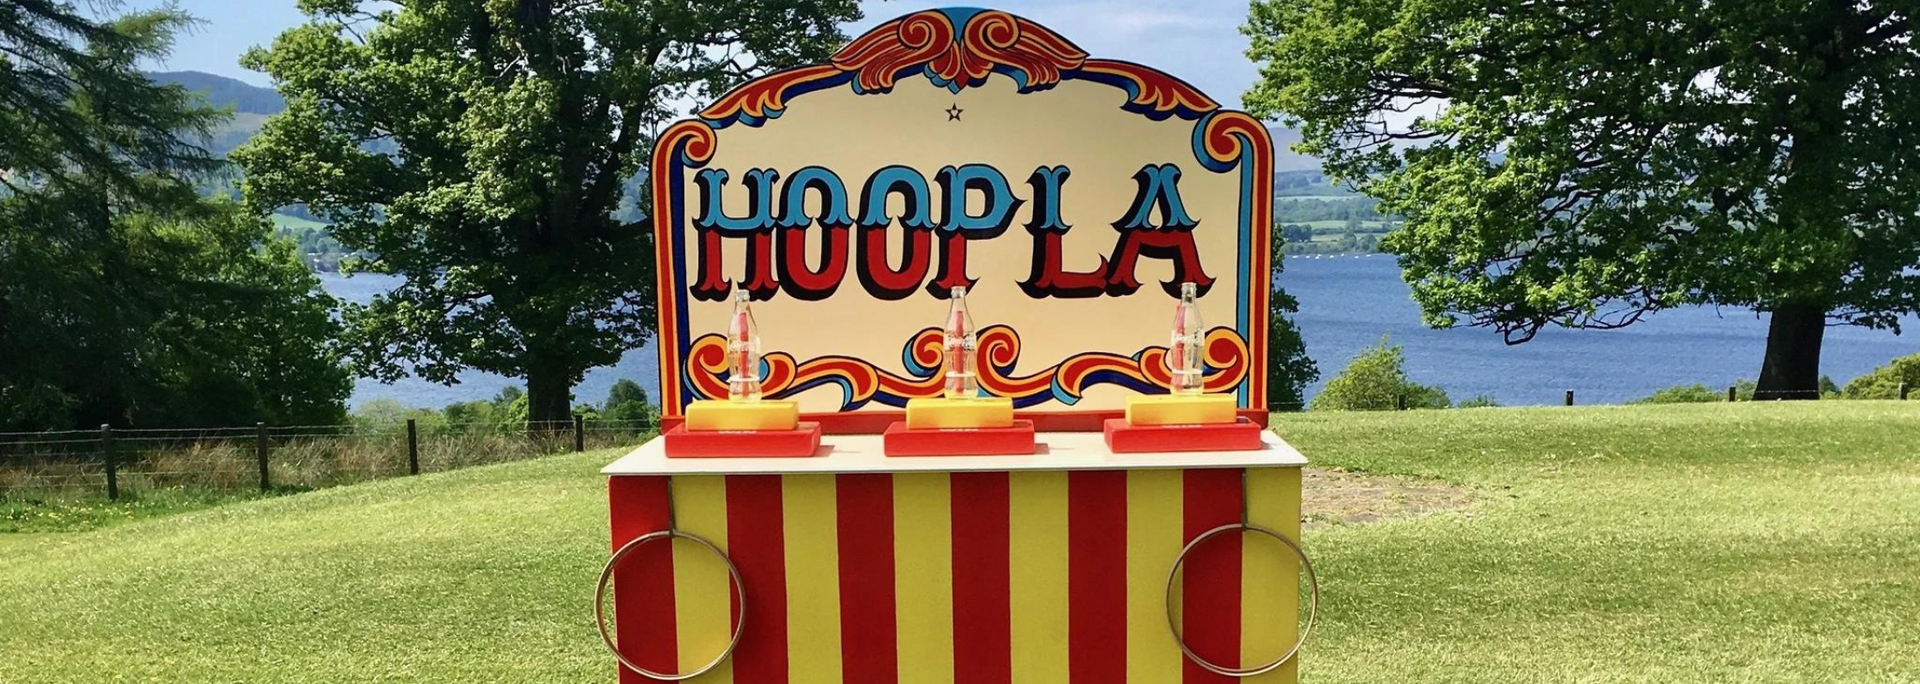 Picture of a game of hoopla.